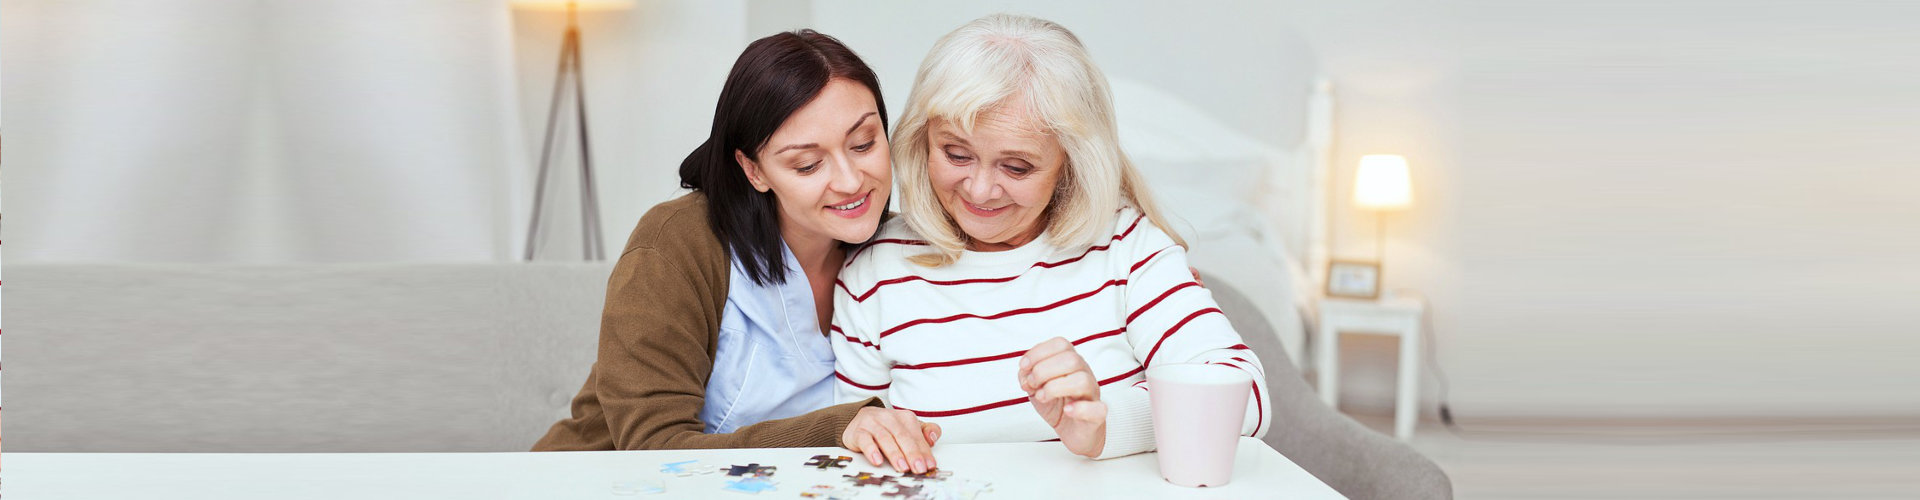 caregiver and senior woman playing with puzzles